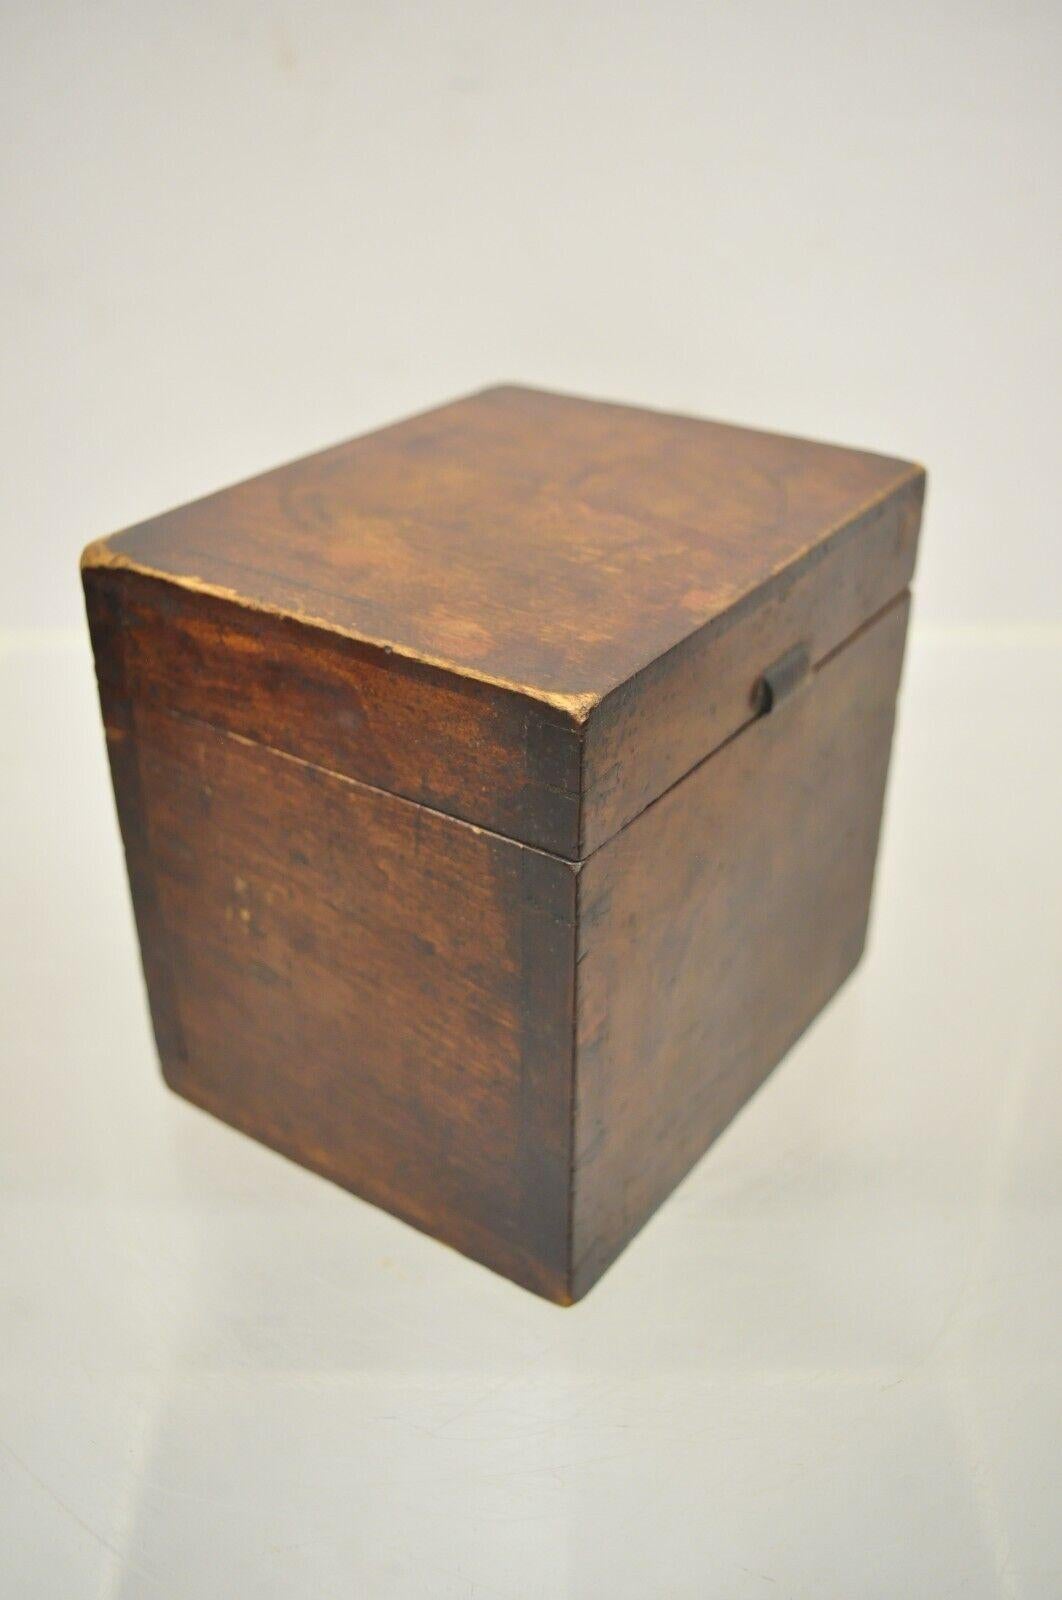 Antique English walnut tea caddy small desk box Victorian with Dovetail. Item features dovetailed joints, solid wood construction, beautiful wood grain, very nice antique item. Circa 19th century. Measurements: 5